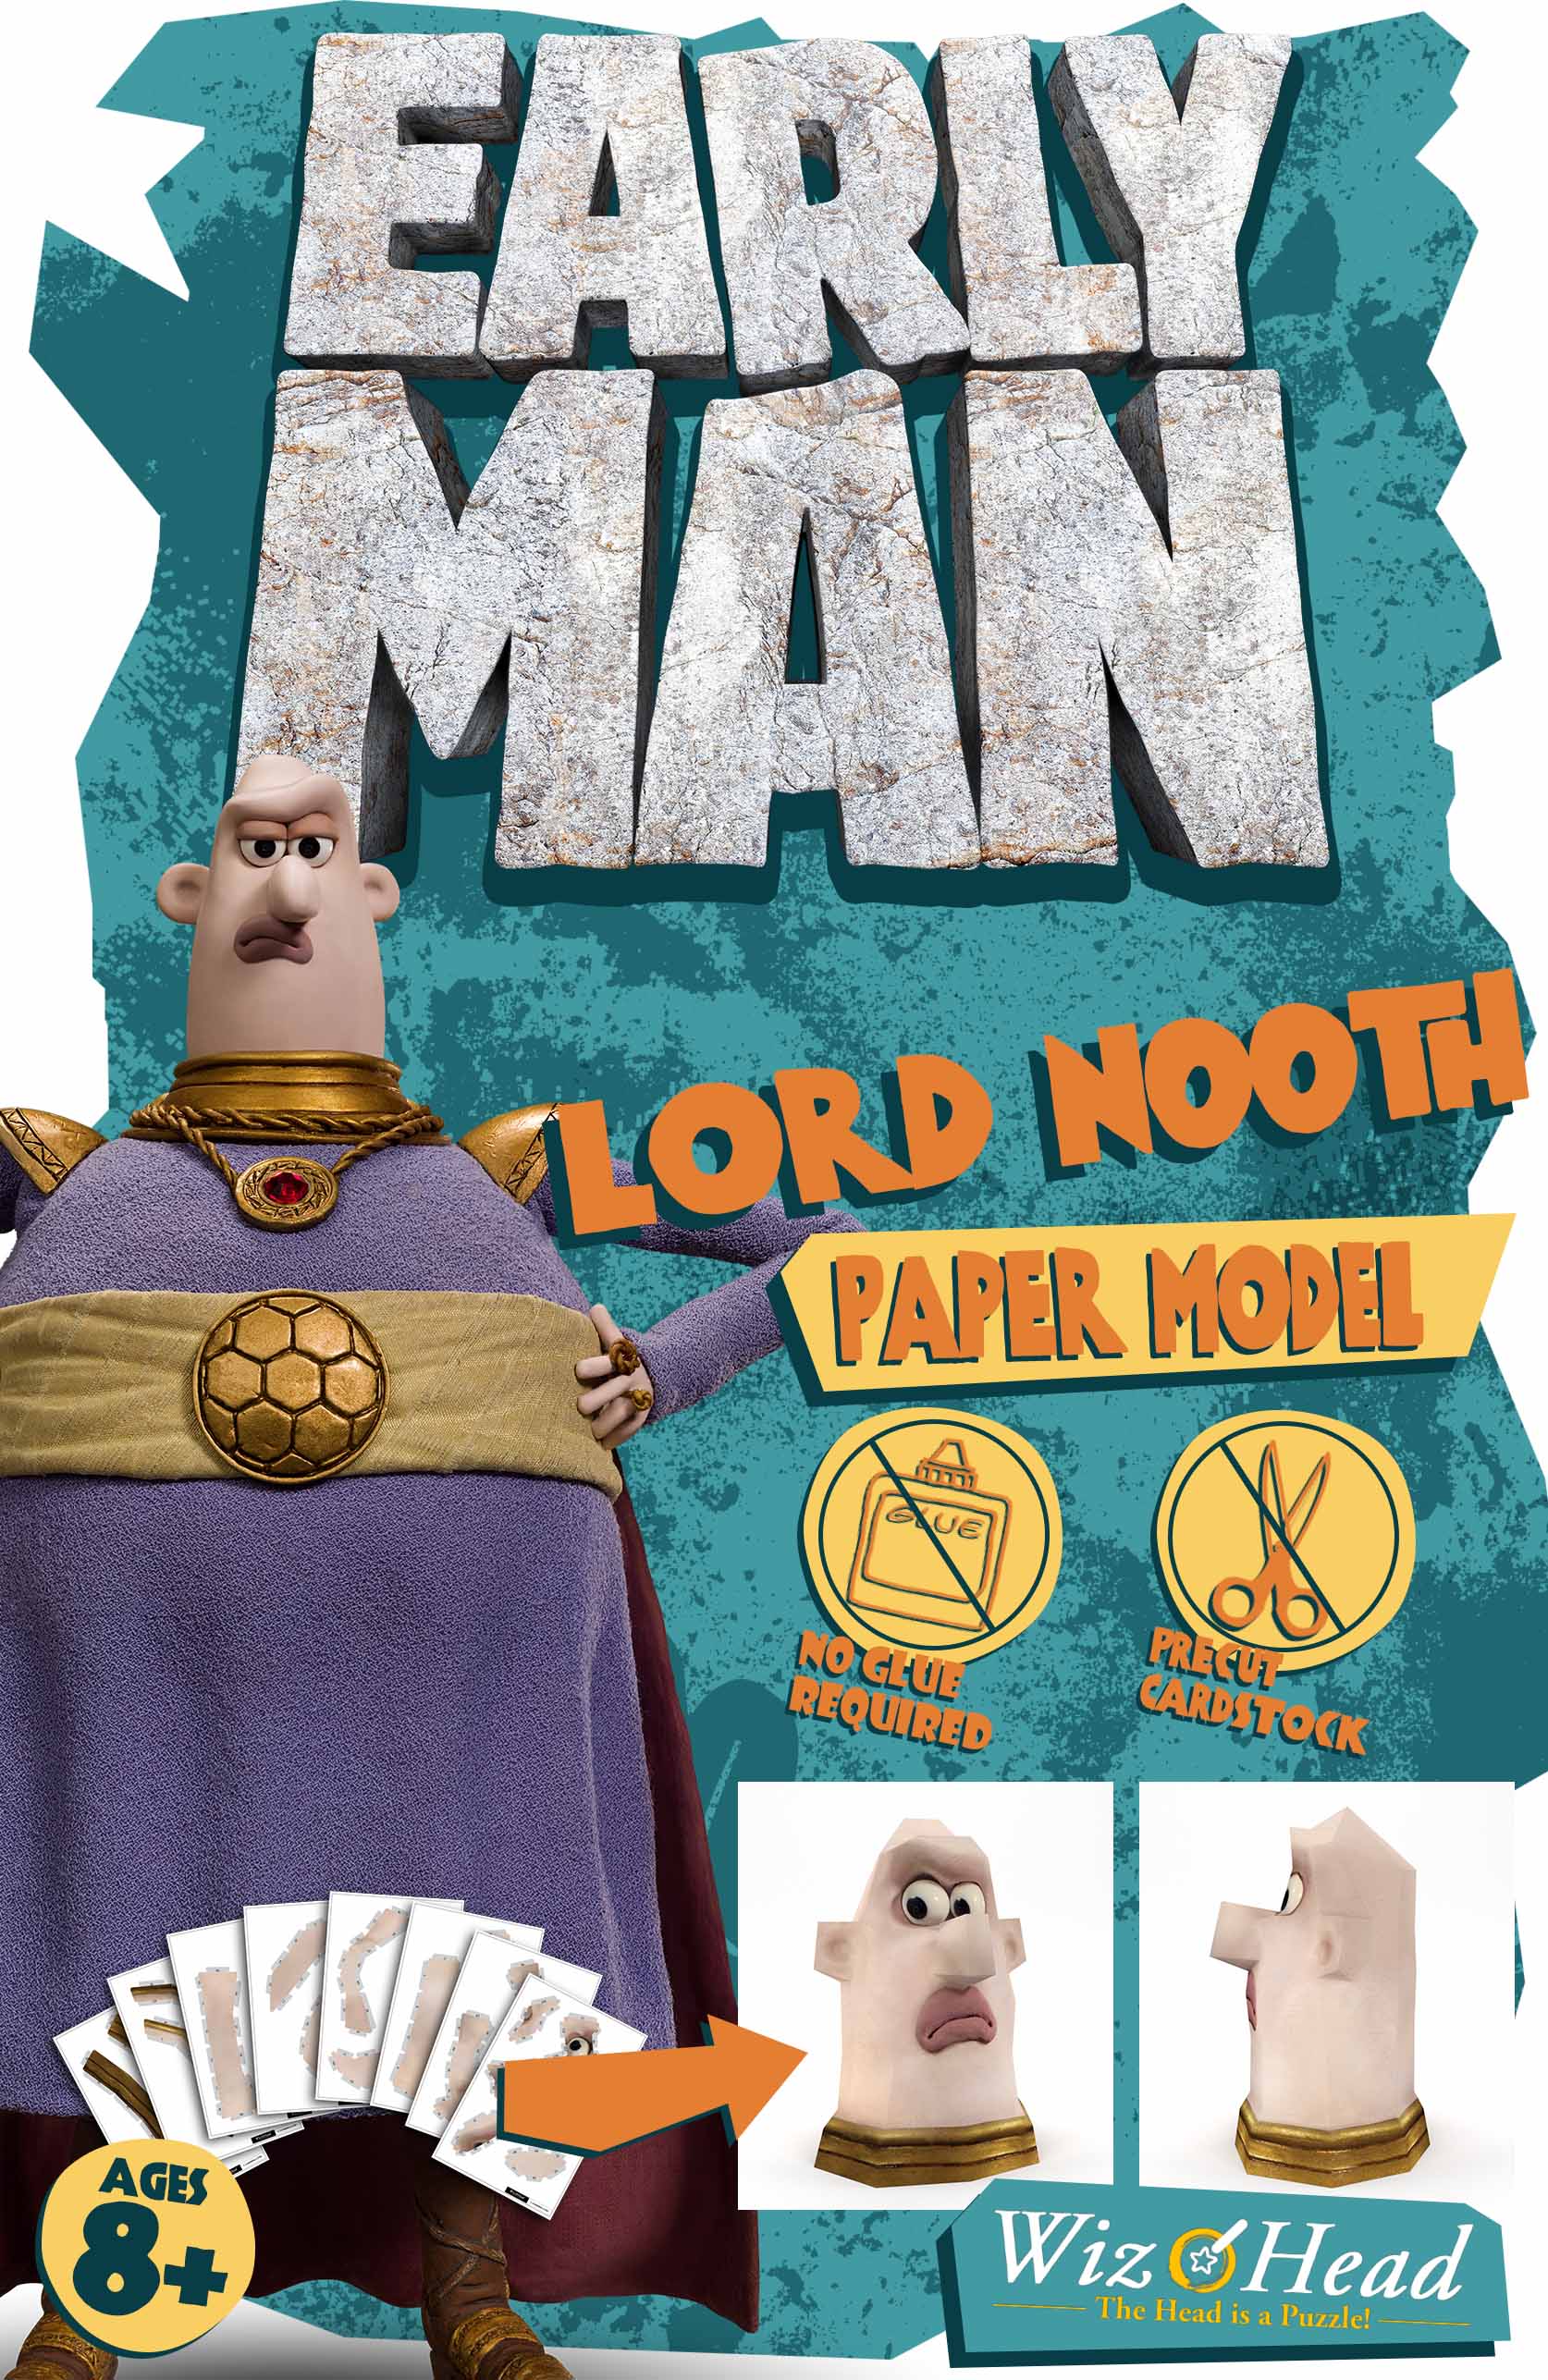 Early Man - Lord Nooth